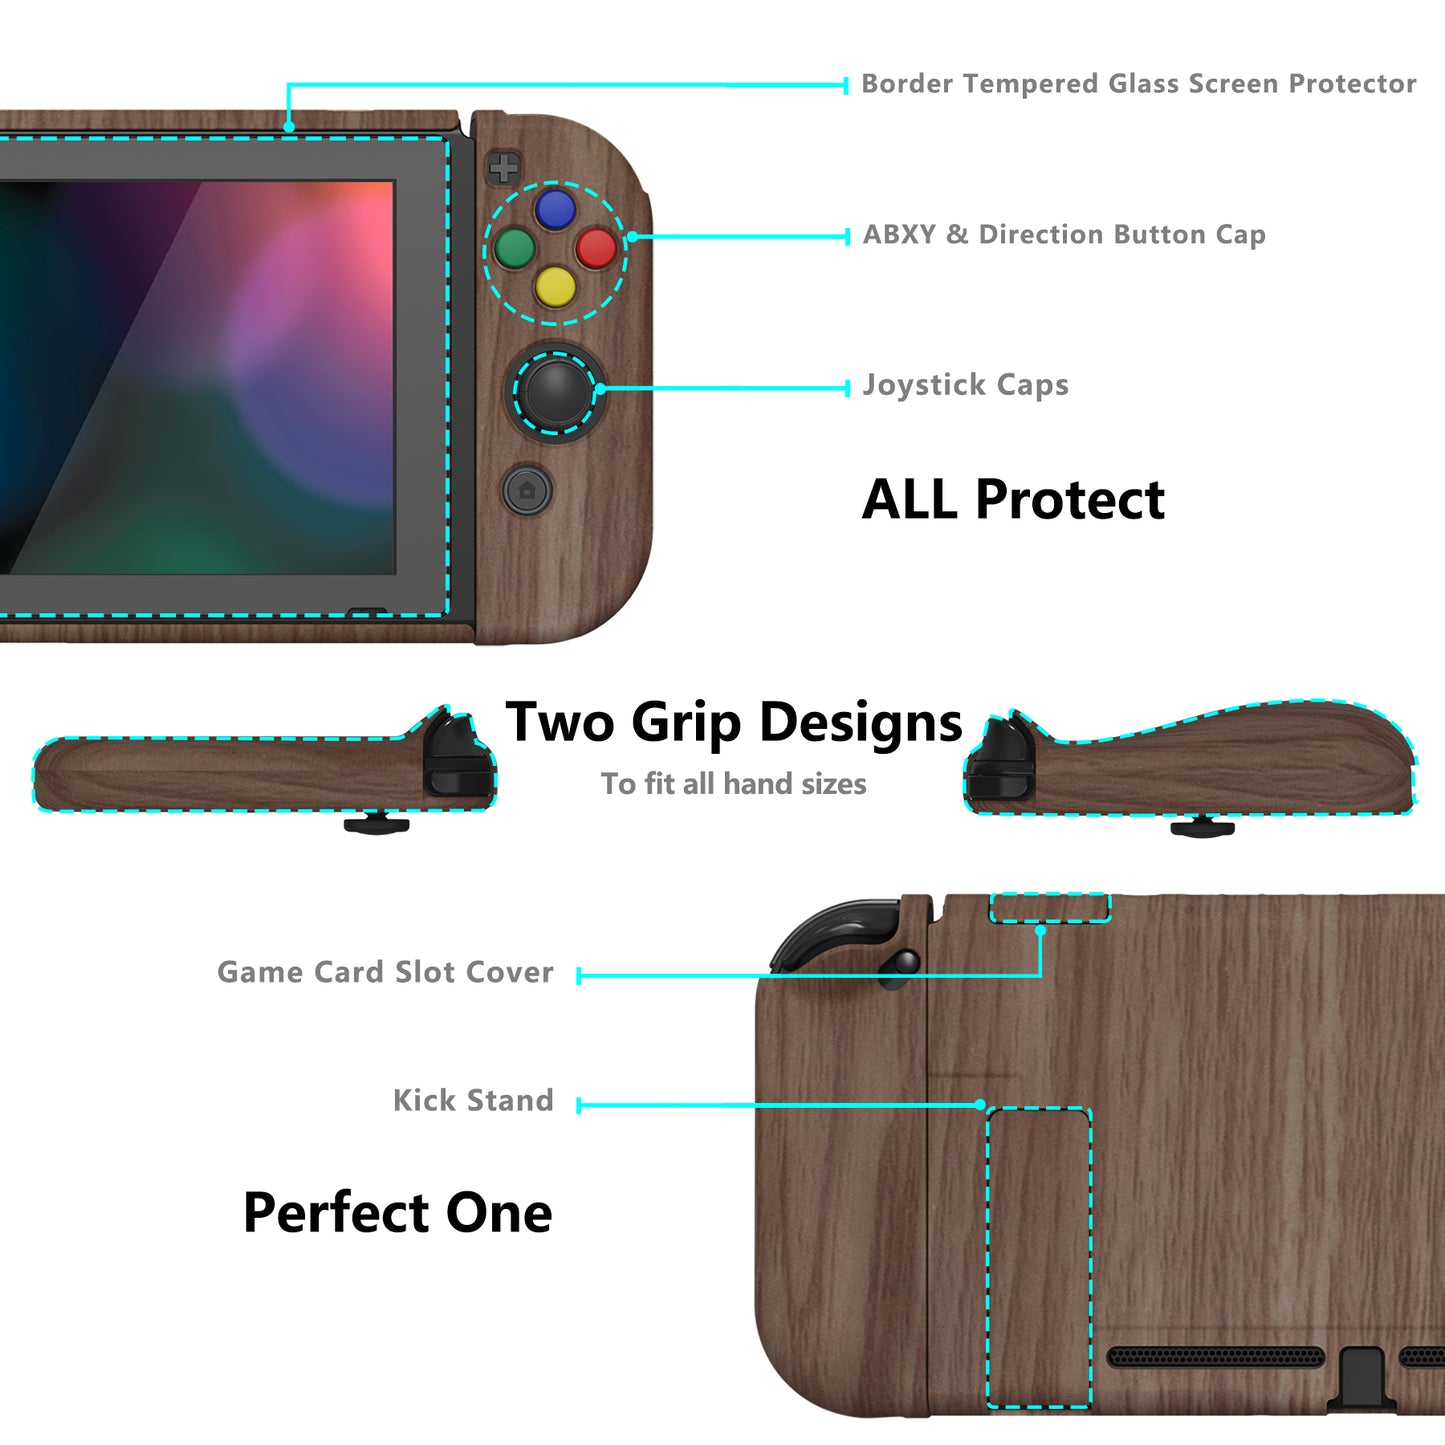 PlayVital AlterGrips Dockable Protective Case Ergonomic Grip Cover for Nintendo Switch, Interchangeable Joycon Cover w/Screen Protector & Thumb Grip Caps & Button Caps - Wood Grain - TNSYS2001 playvital